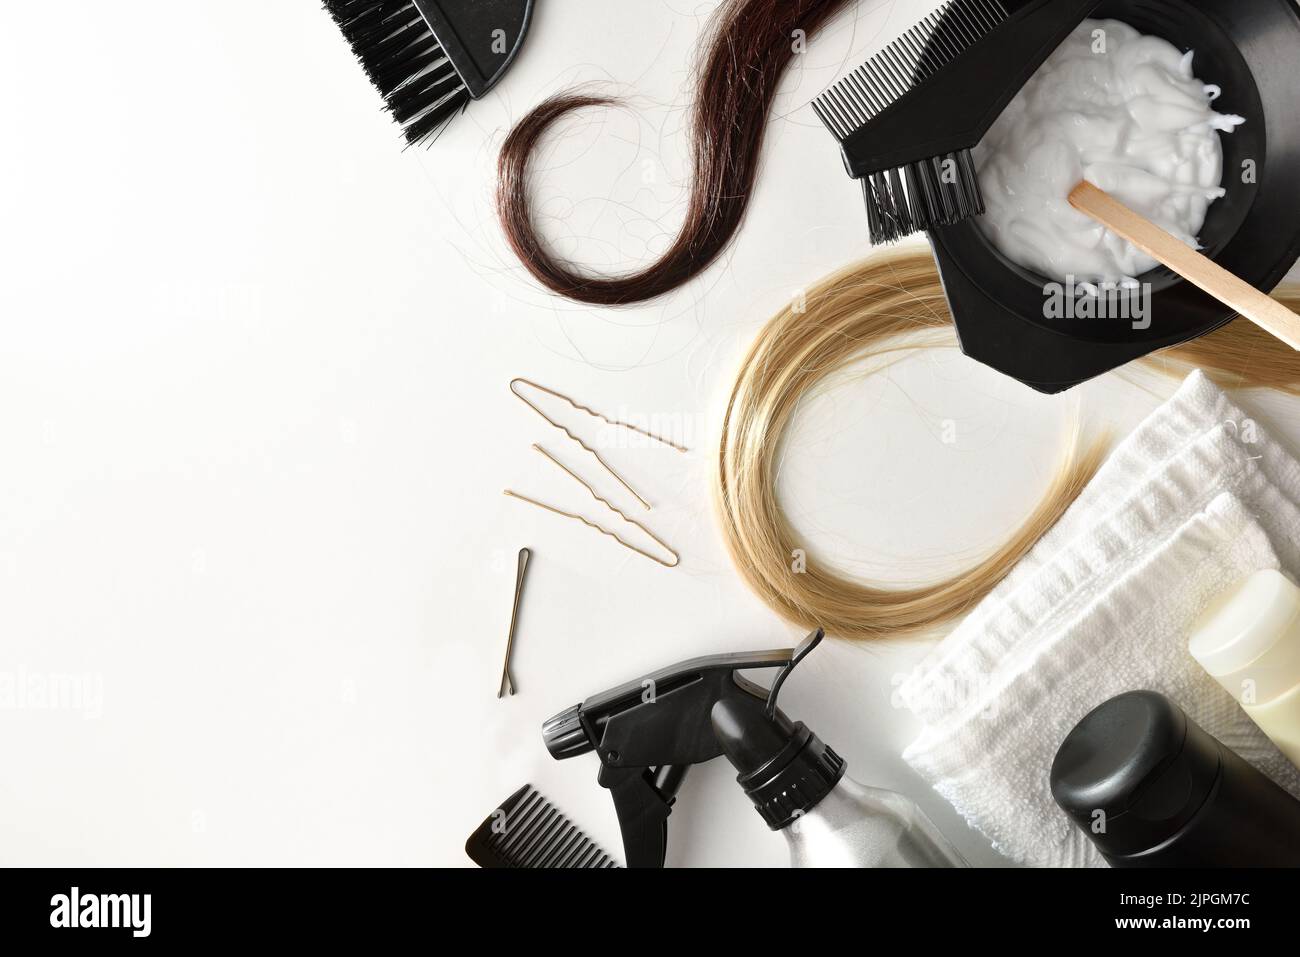 Set of hair care and coloring products from a stylist salon on white table. Top view. Horizontal composition. Stock Photo